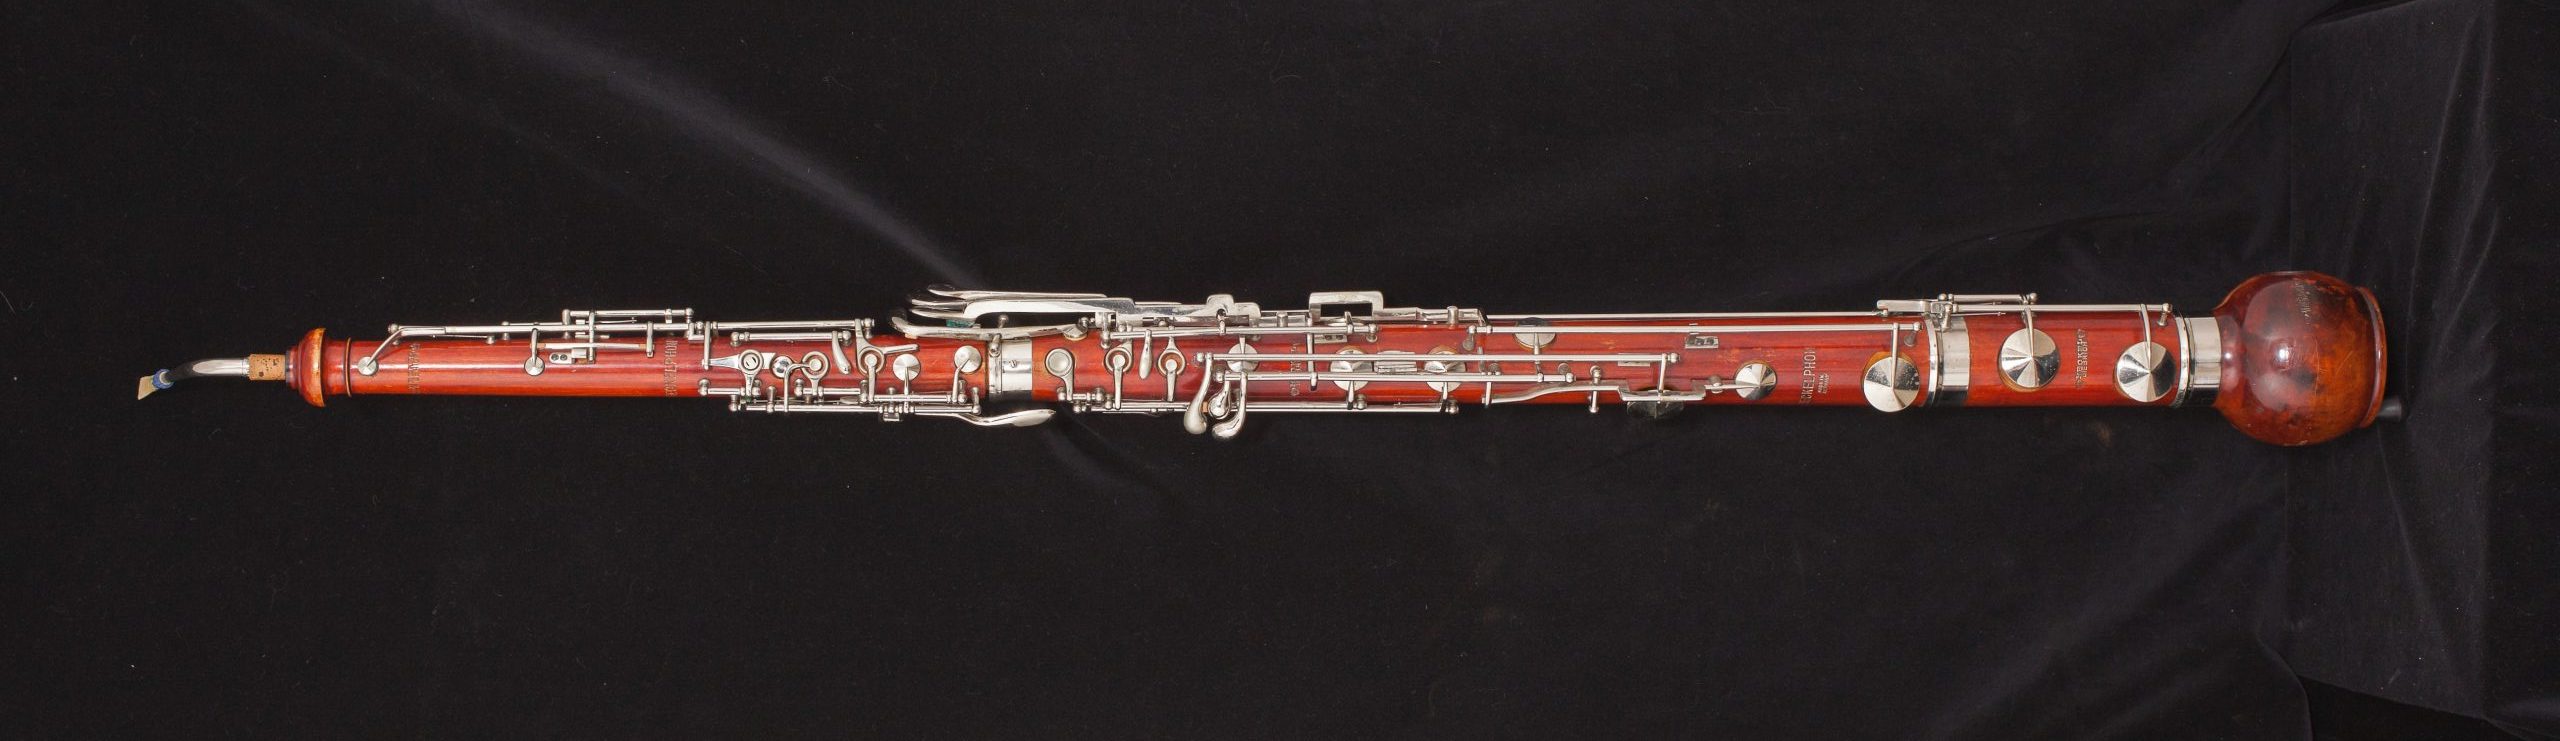 image of a heckelphone from the front side